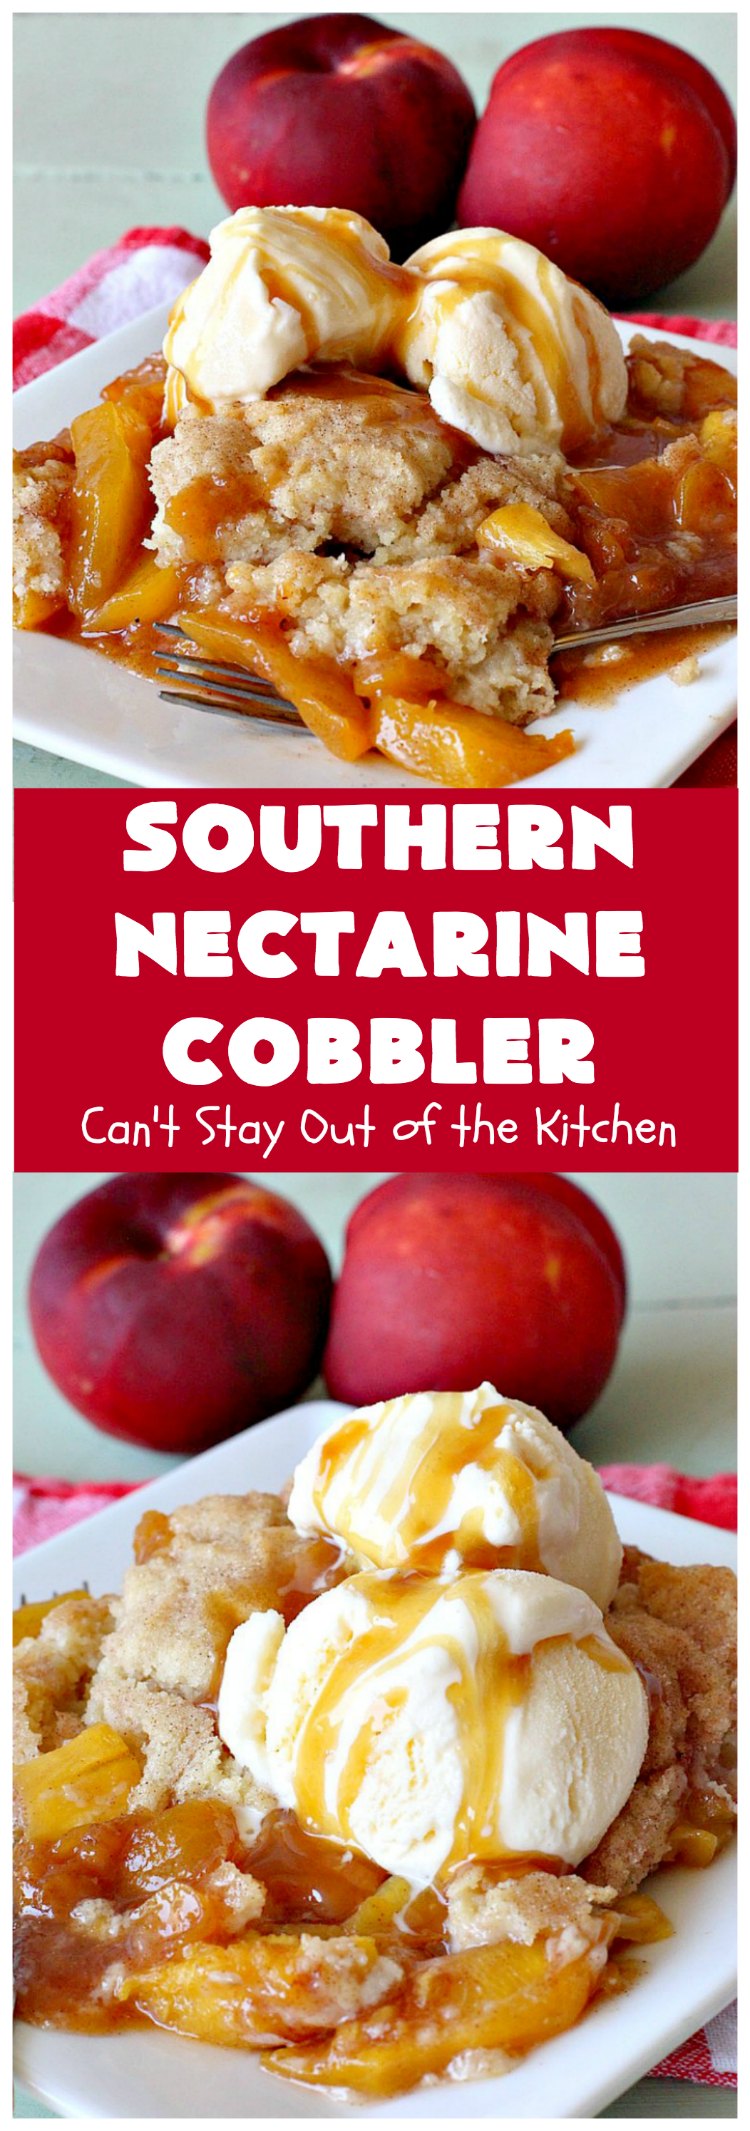 Southern Nectarine Cobbler | Can't Stay Out of the Kitchen